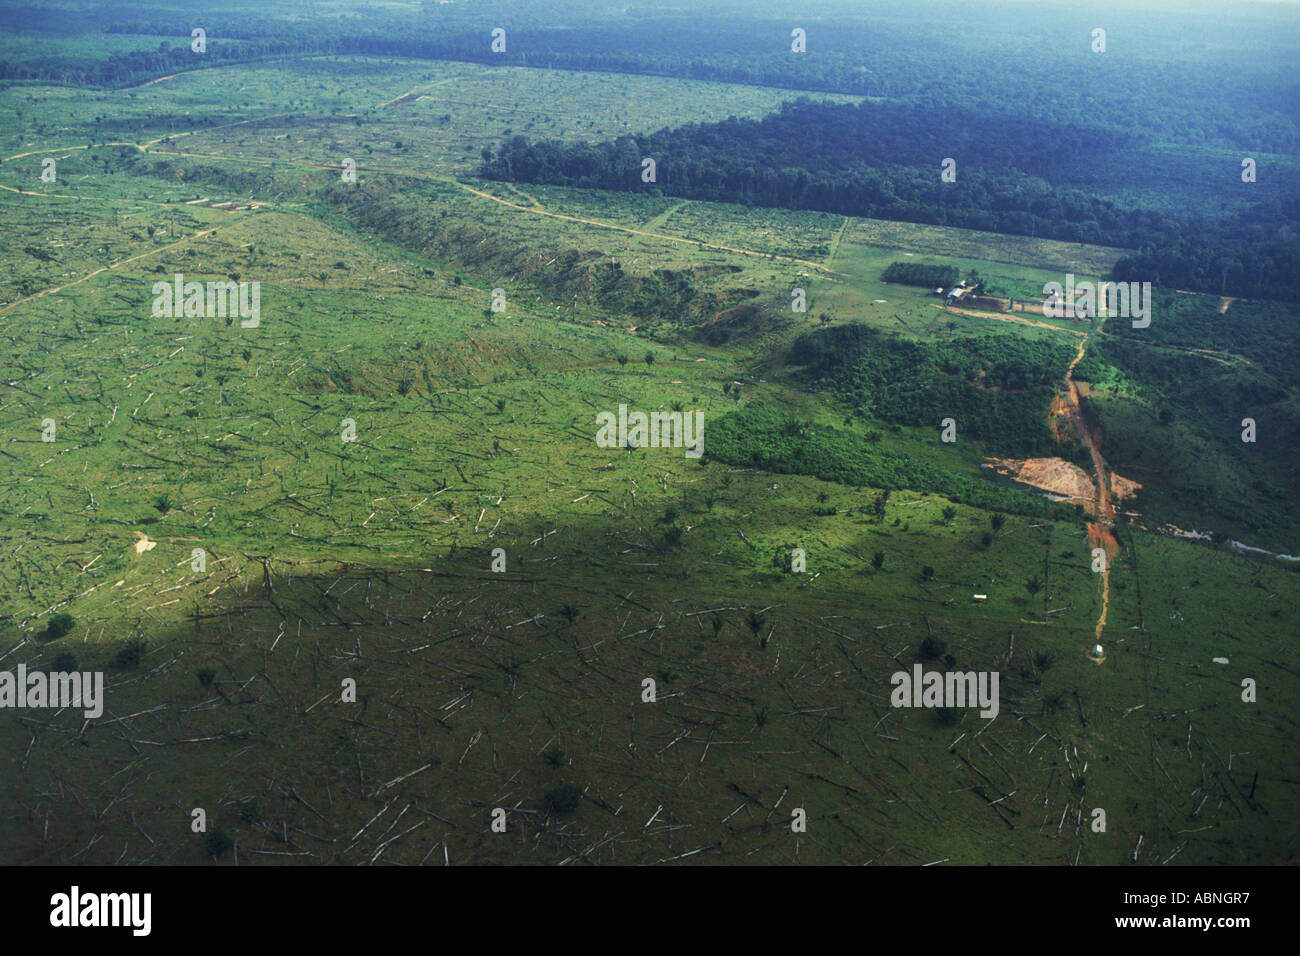 Deforestation or clear cutting of rain forests in Brazil near Amazon River Stock Photo